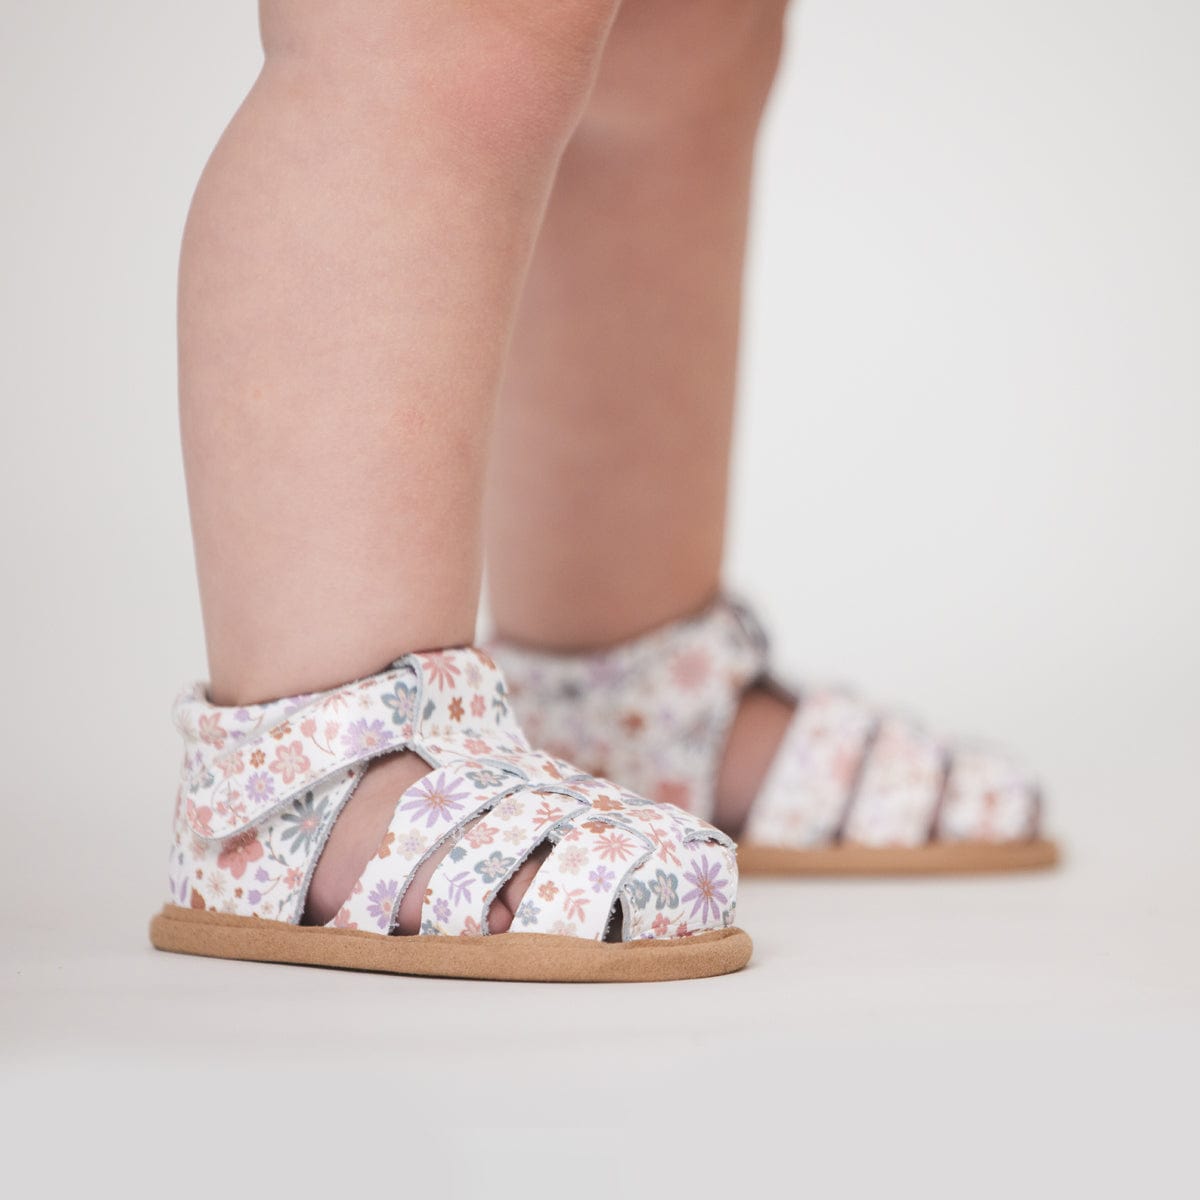 Pretty Brave Baby Shoes Rio Sandal in Botanical